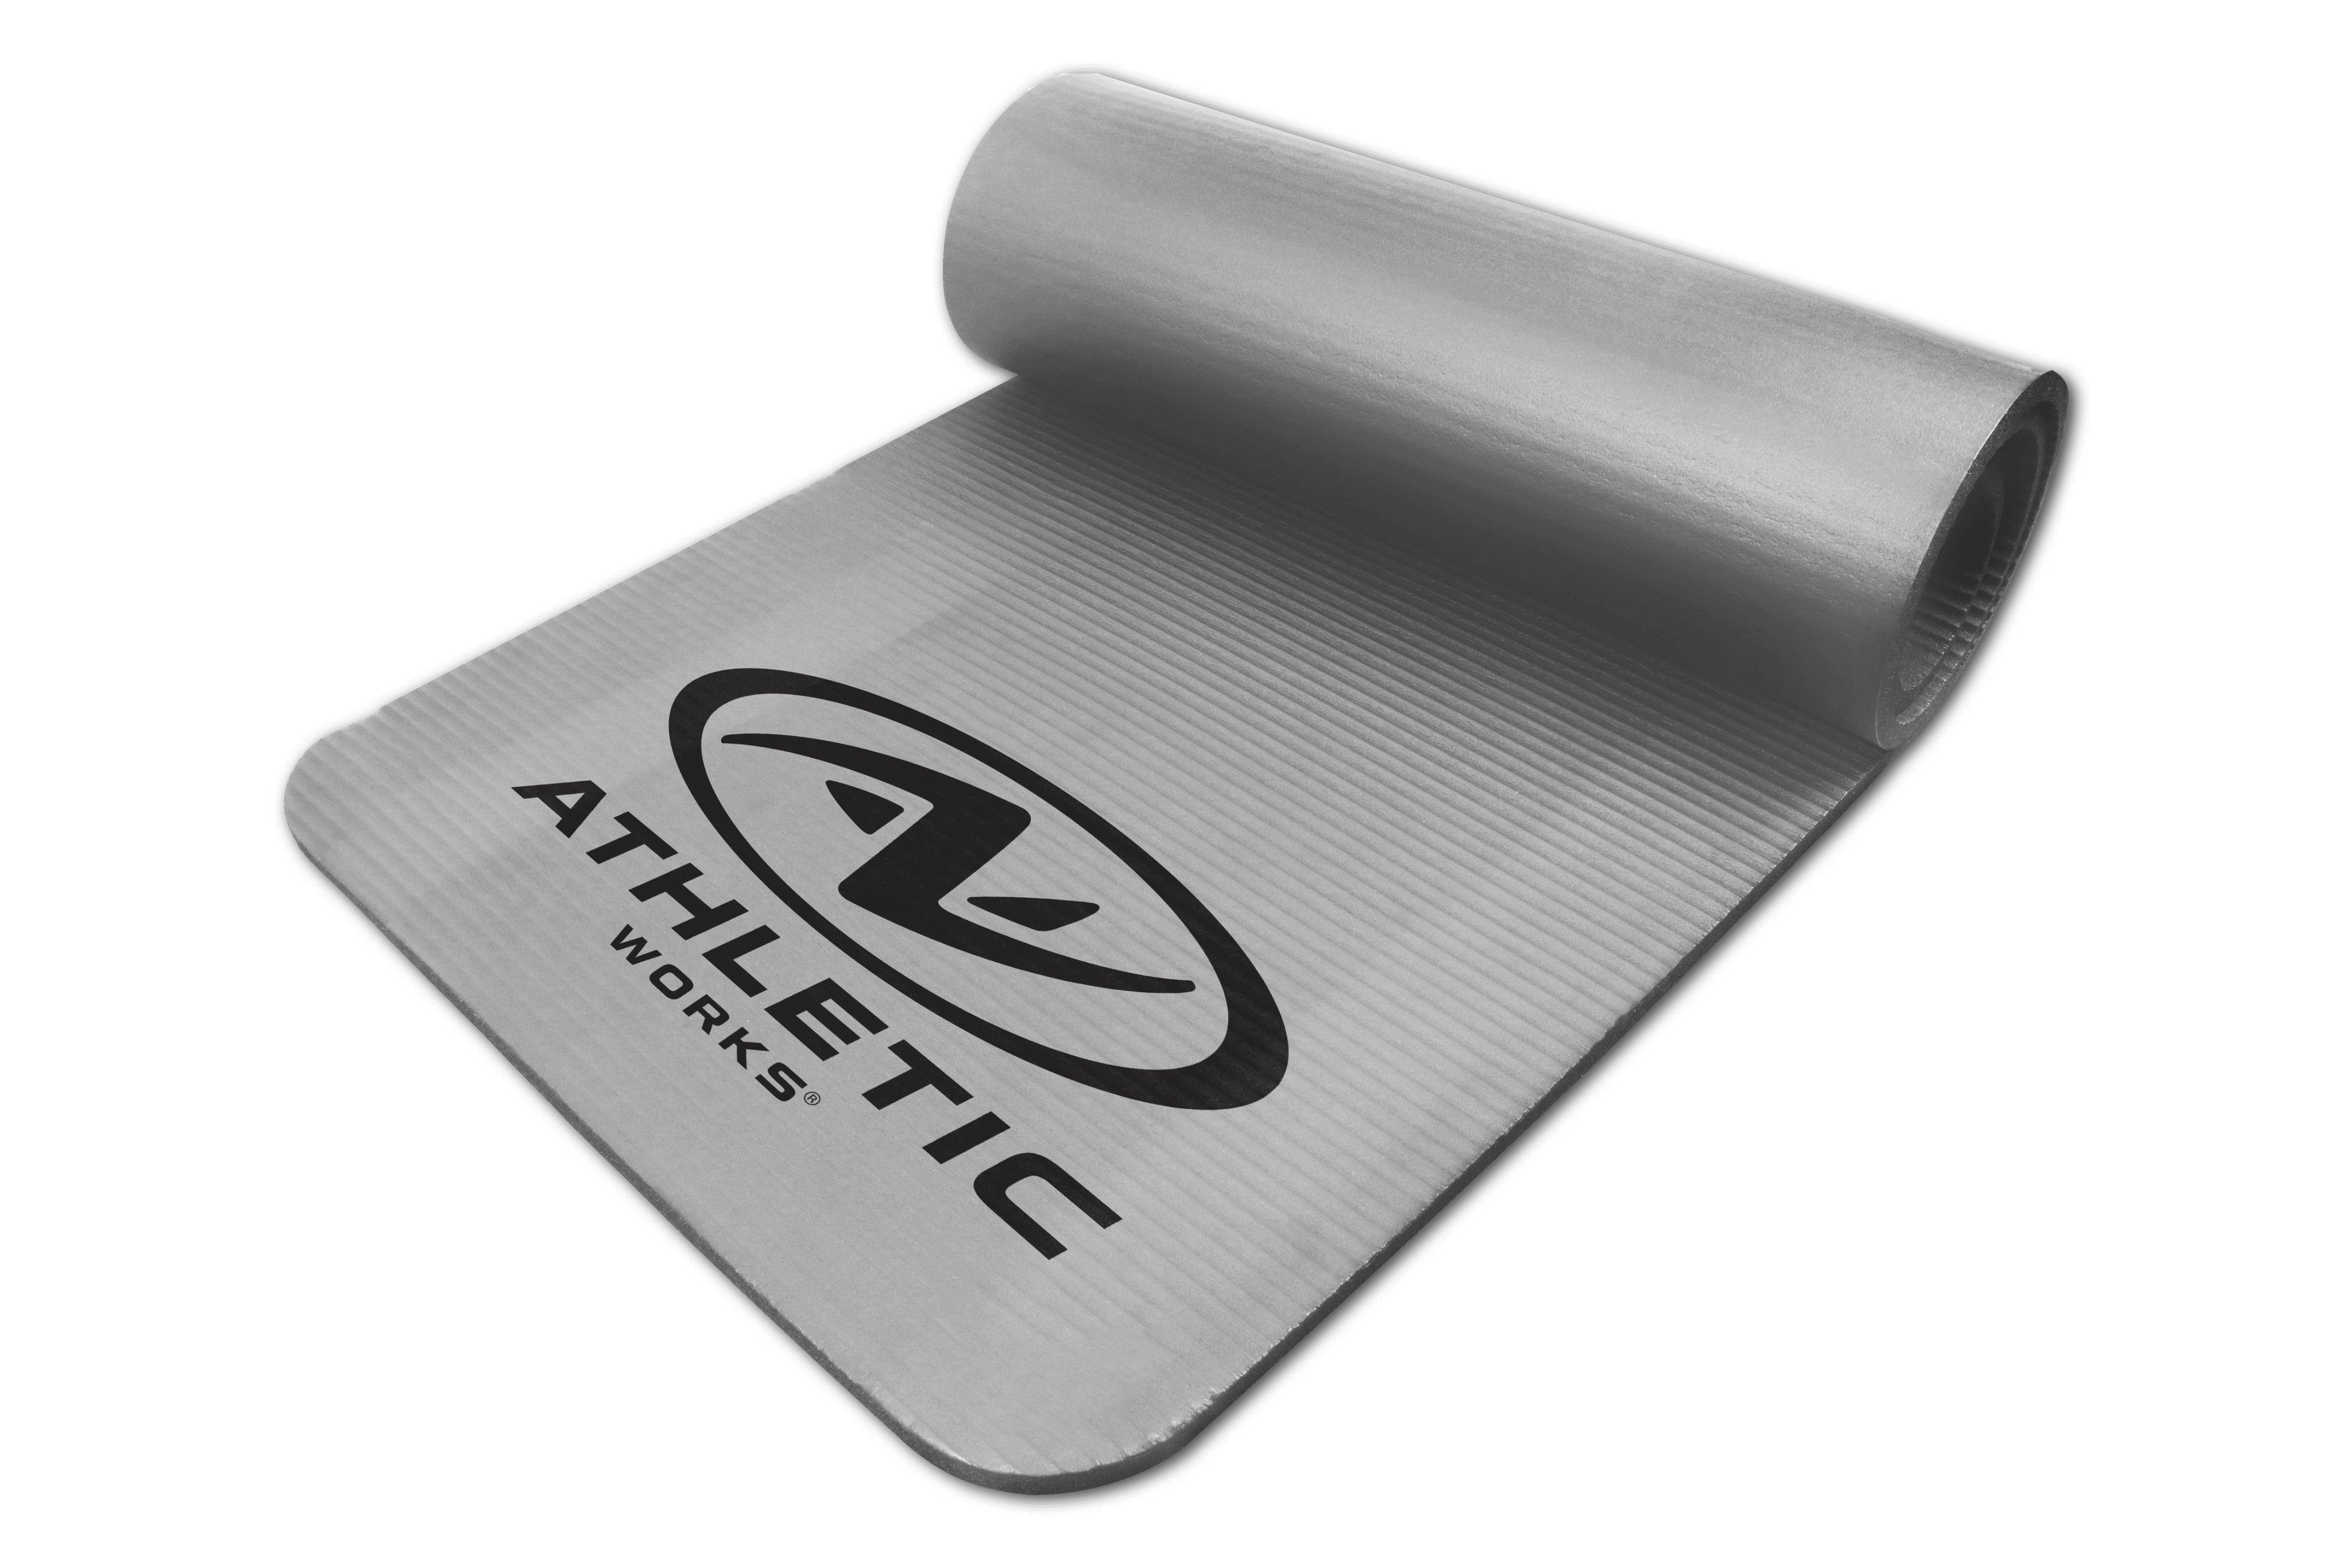 Athletic Works 12mm Pro Fitness Mat, material: NBR foam, with carrying strap, non-slip, Size: 72inx23.5inx12mm